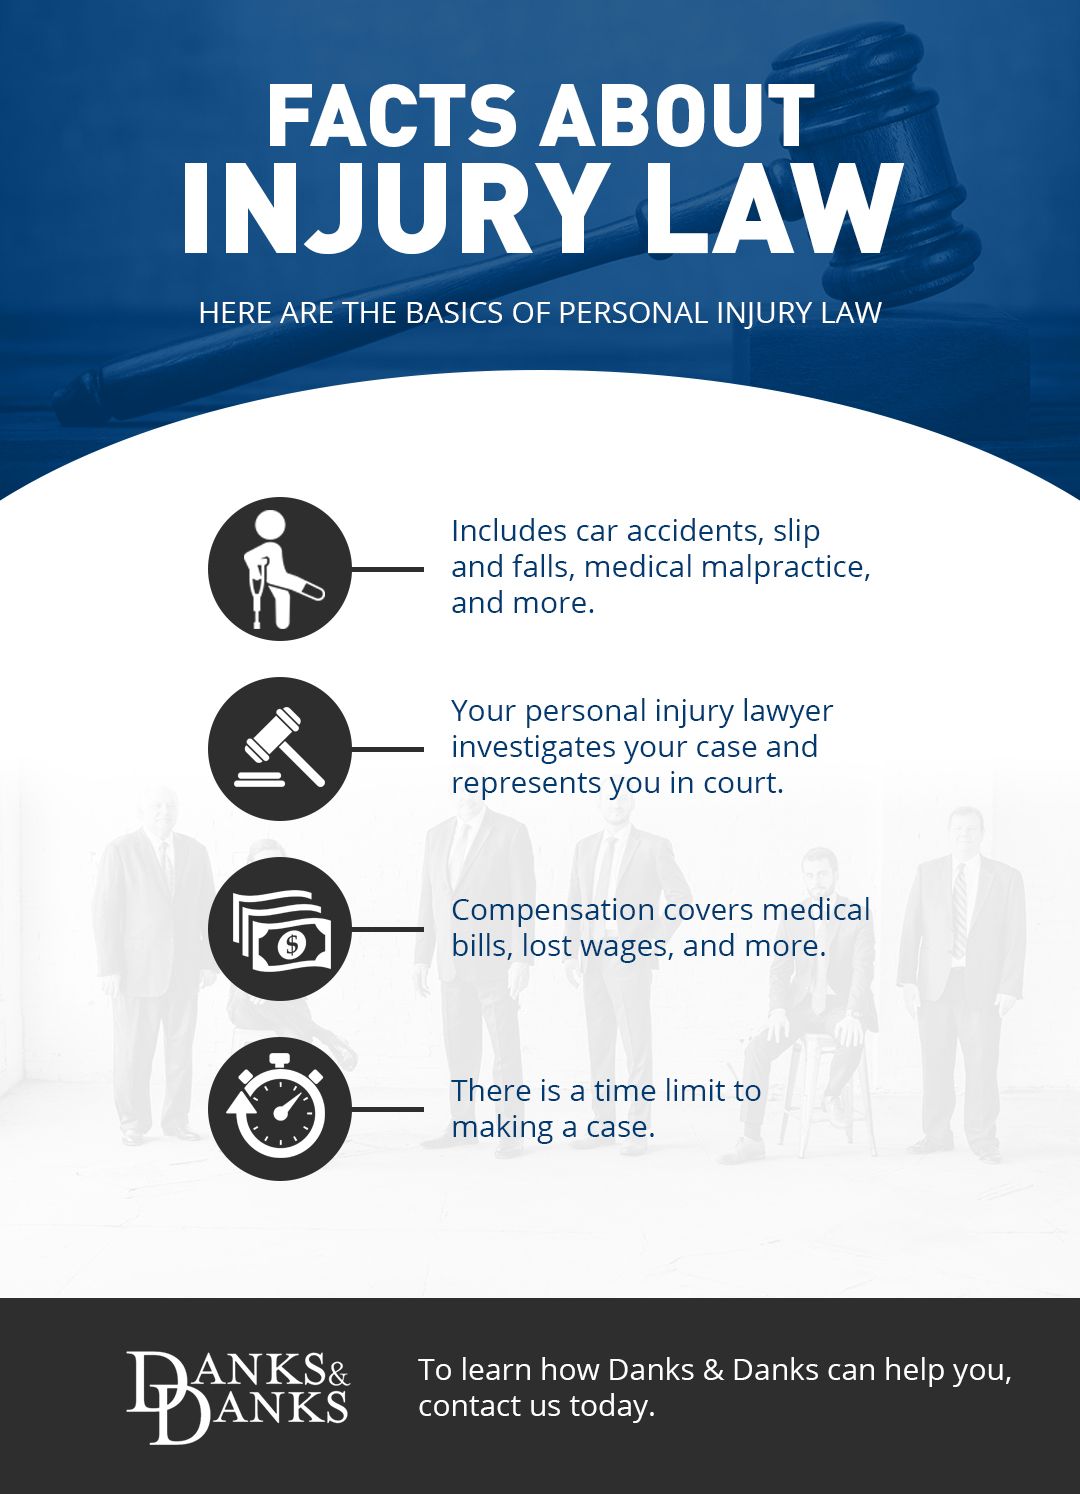 Facts About Injury Law.jpg